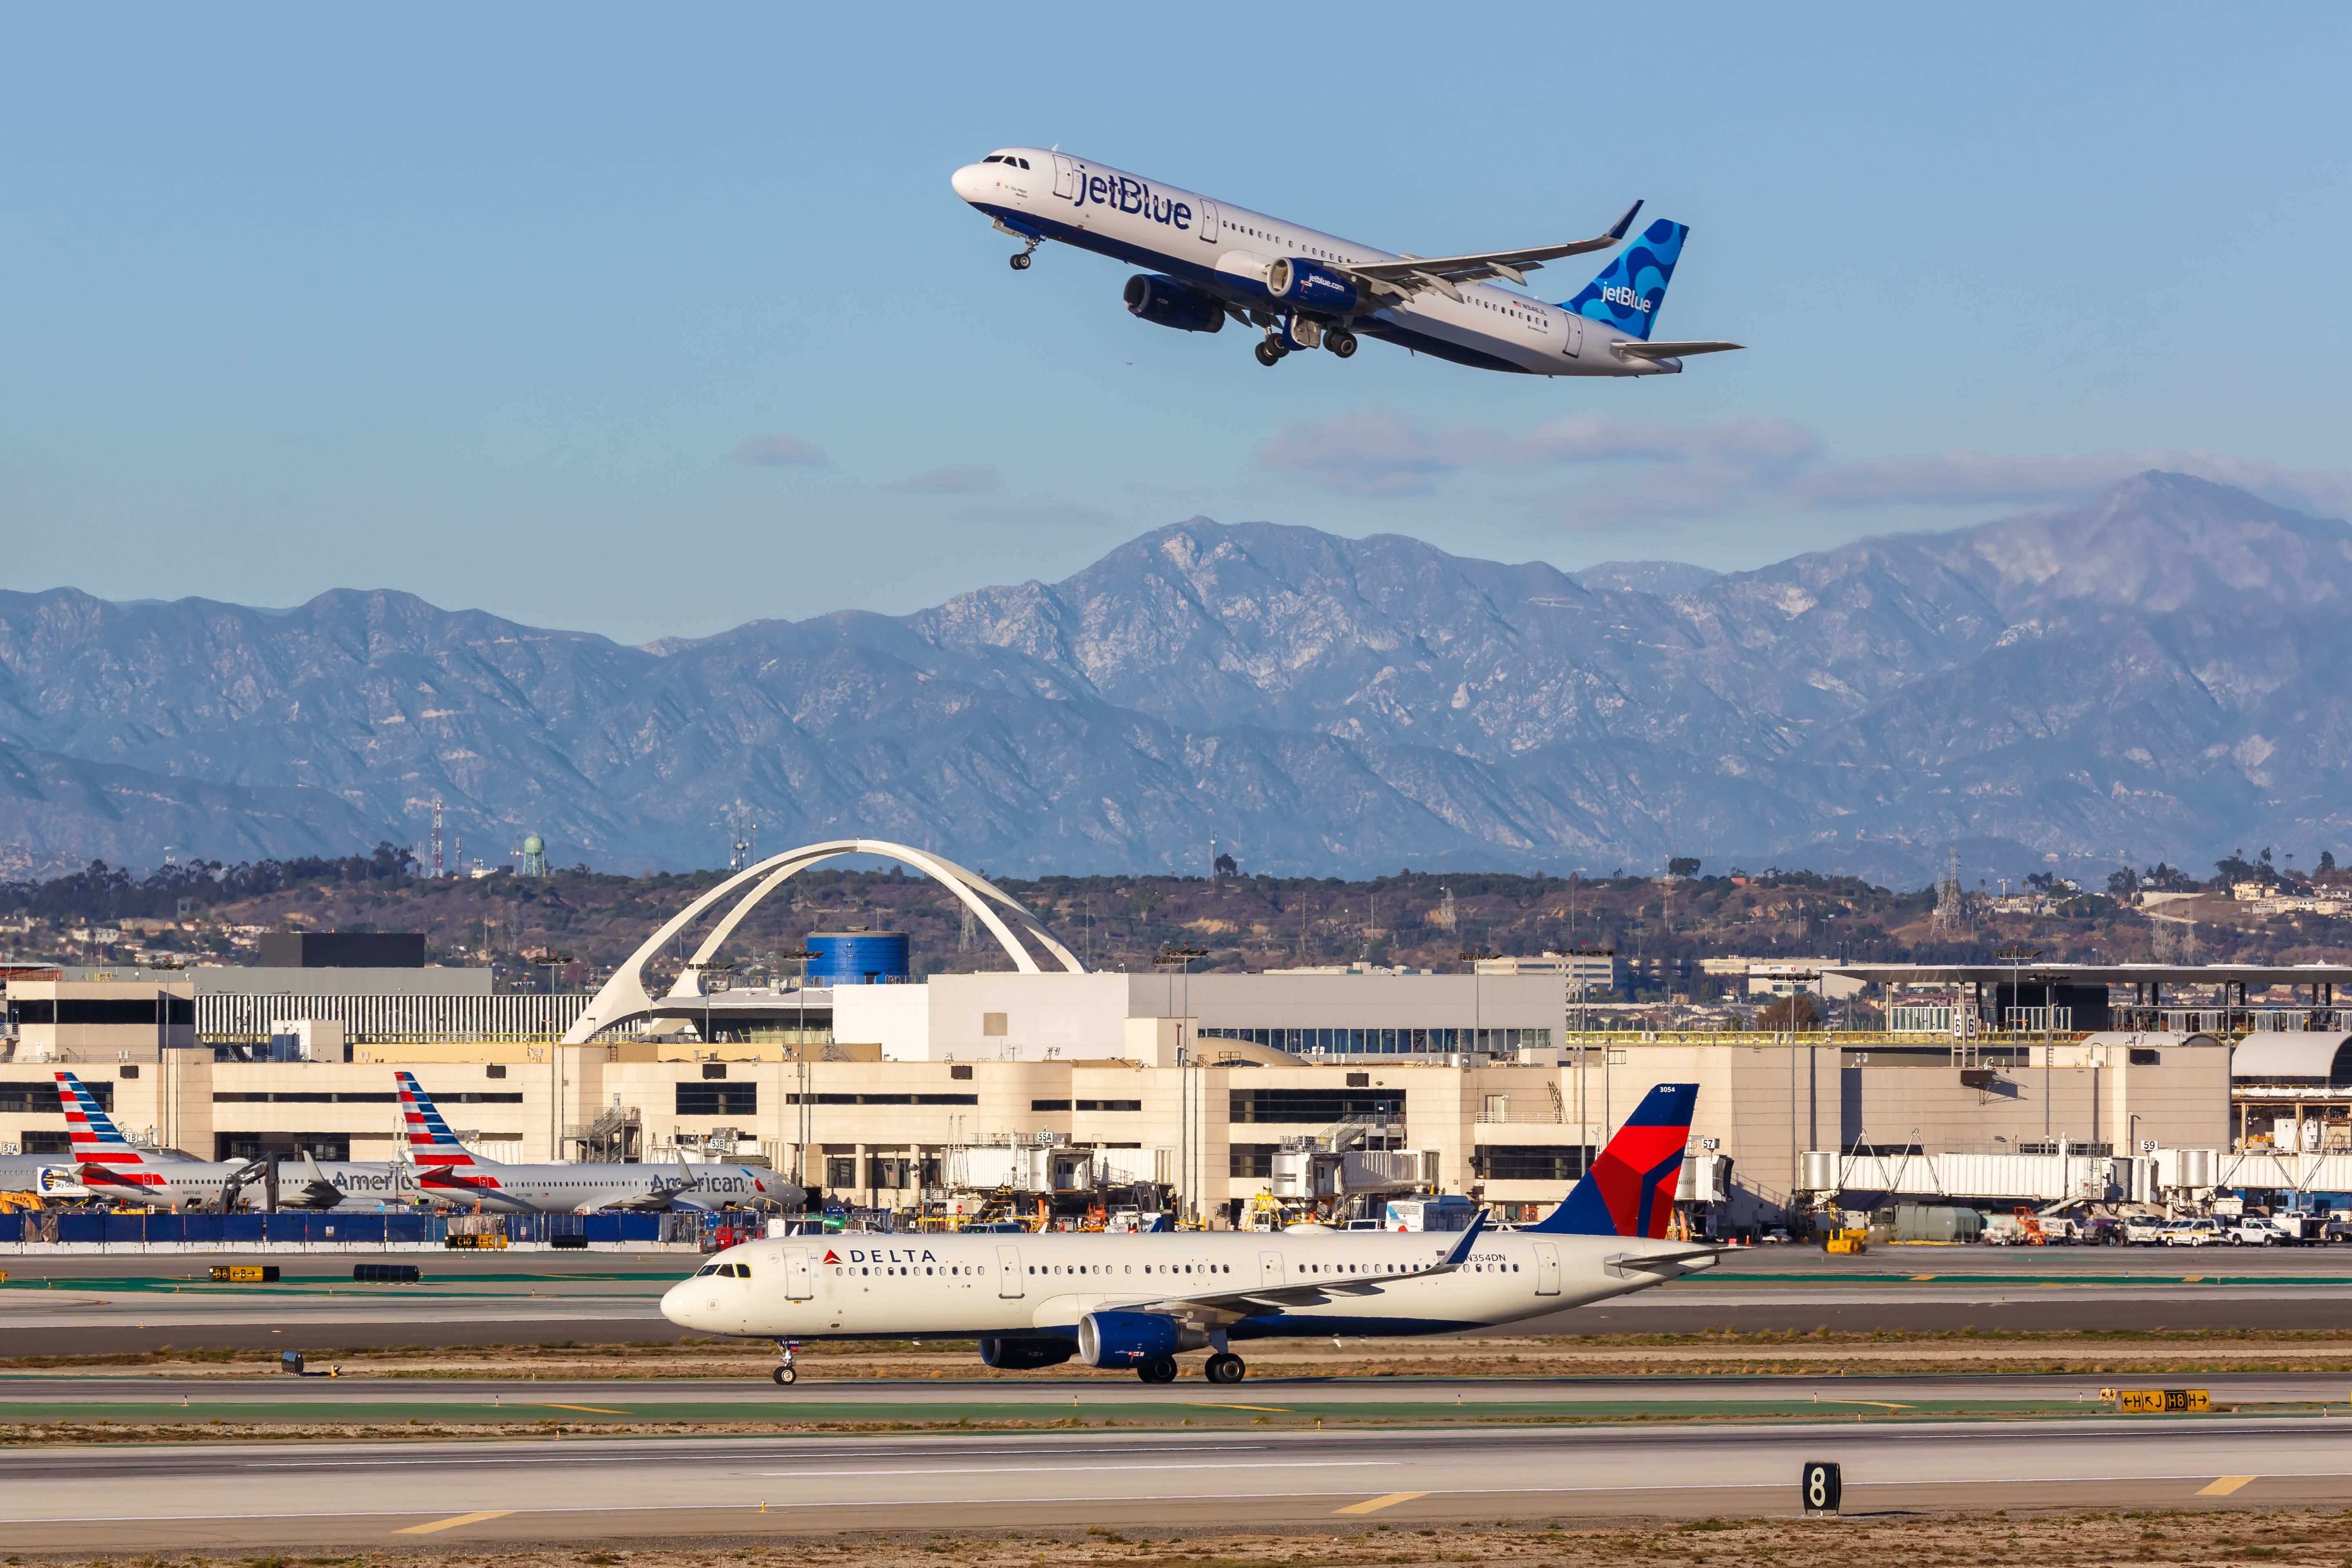 Delta Air Lines and JetBlue Airbus A321 aircraft at Los Angeles Airport.